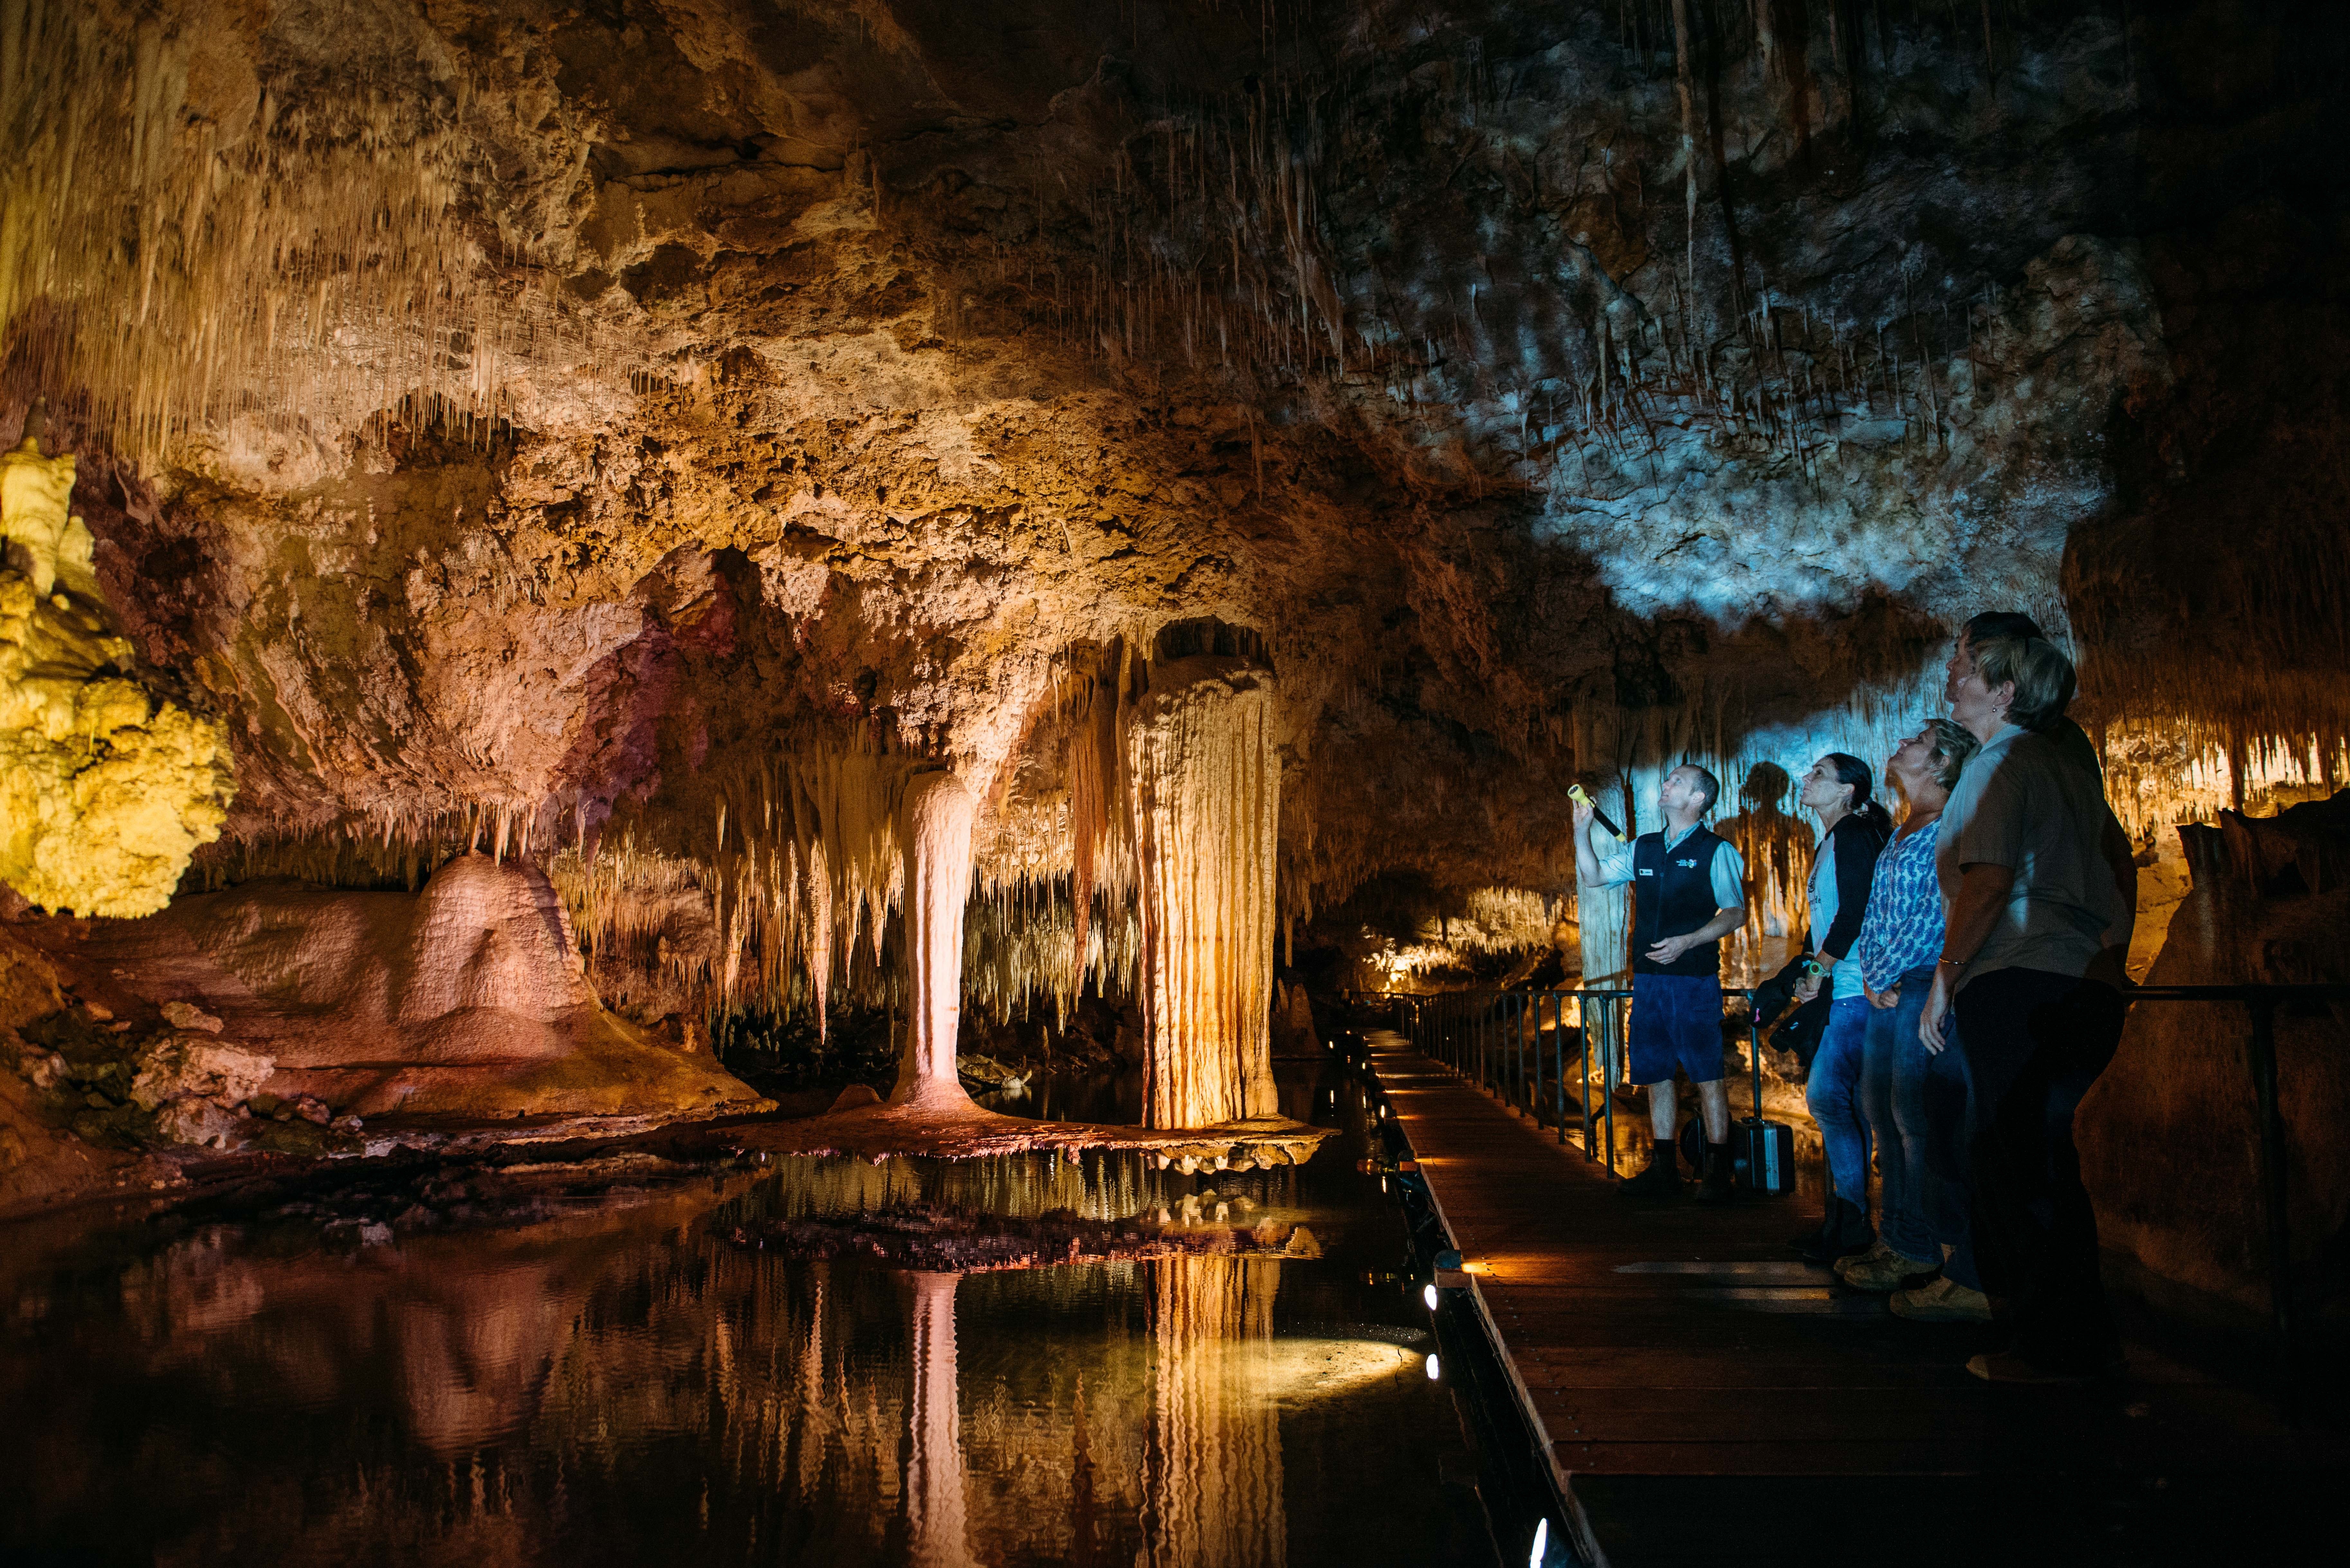 Lake Cave - Attractions